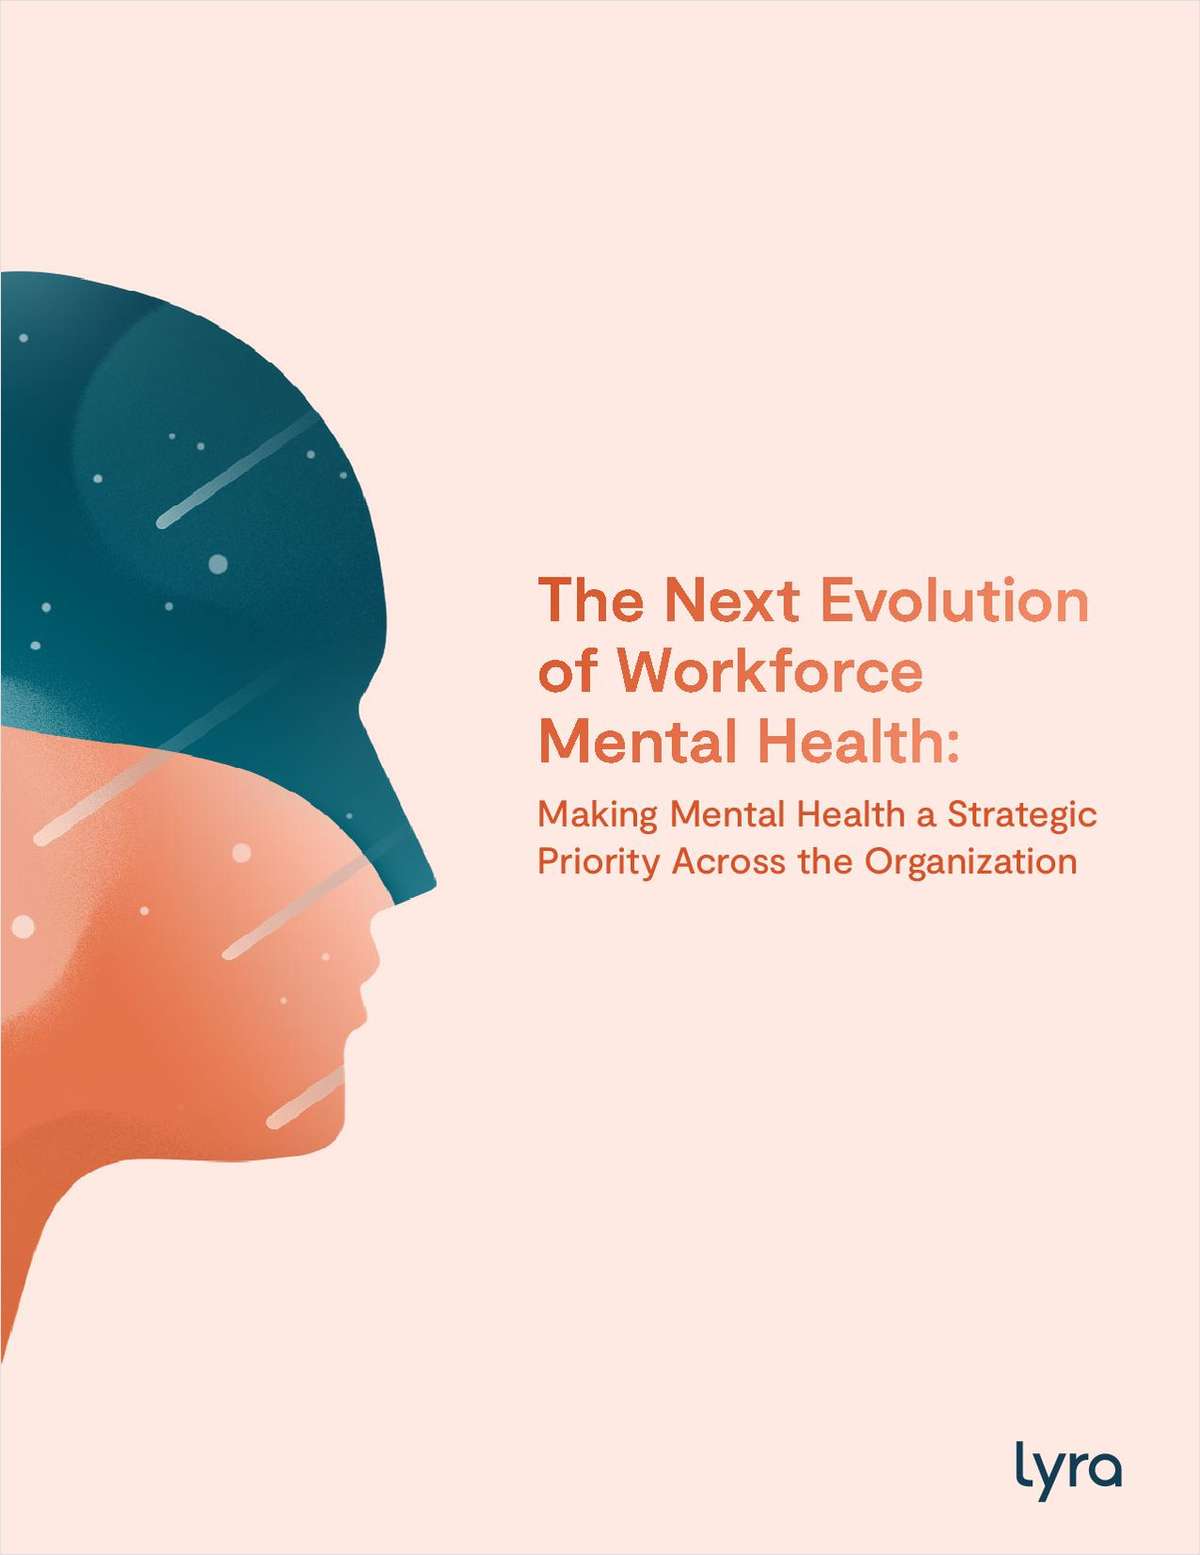 The Next Evolution of Workforce Mental Health: Making Mental Health a Strategic Priority Across the Organization